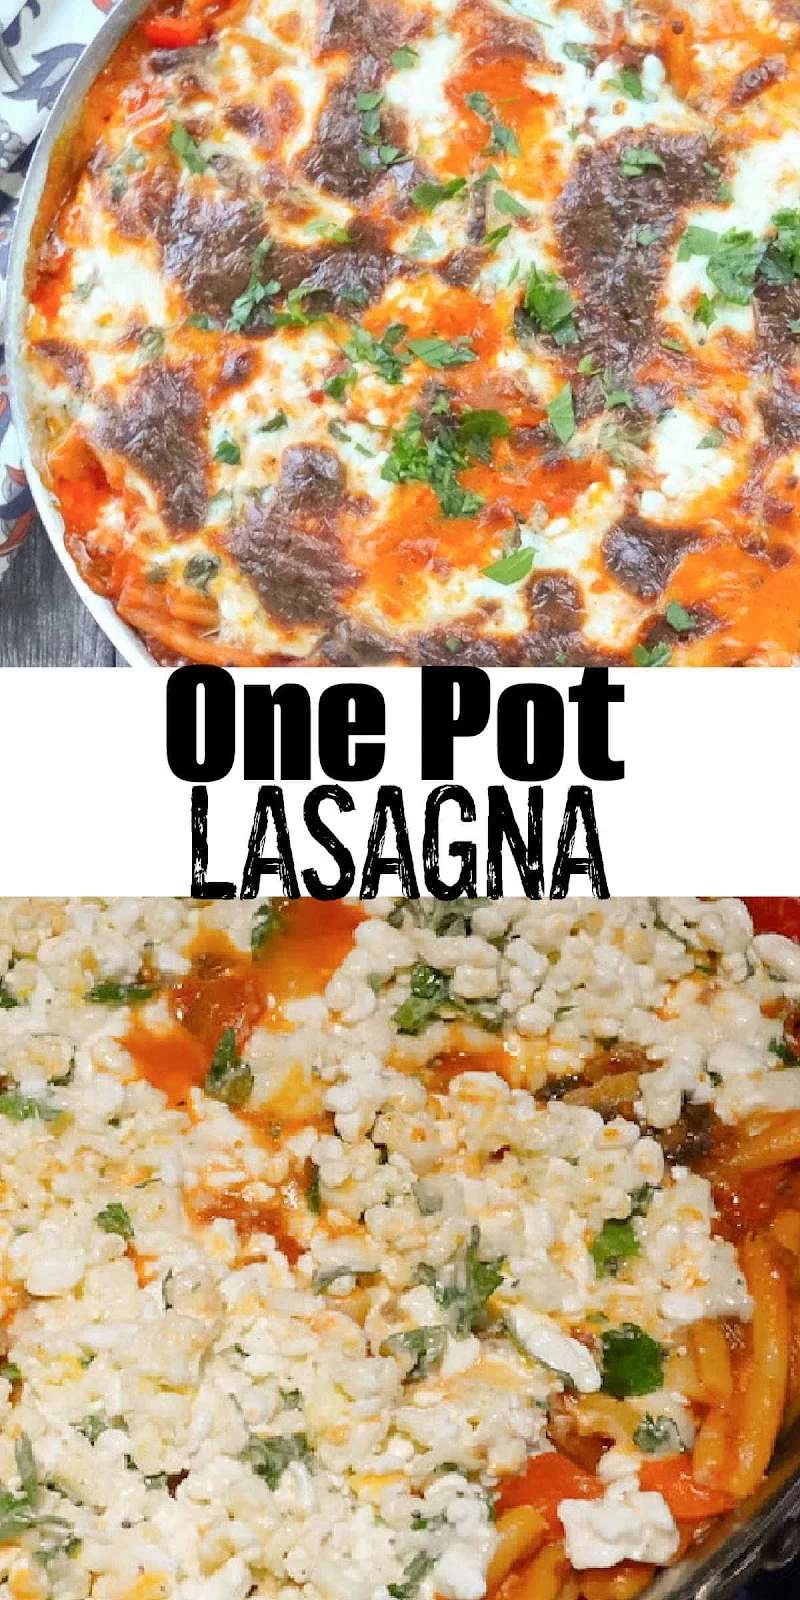 2 photos the top photo is a down shot of One Pot Lasagne. The bottom photo is of One Pot Lasagna after it's covered with the cheese mixture but before it's baked. There is a white banner between the two photos with black text One Pot Lasagna.